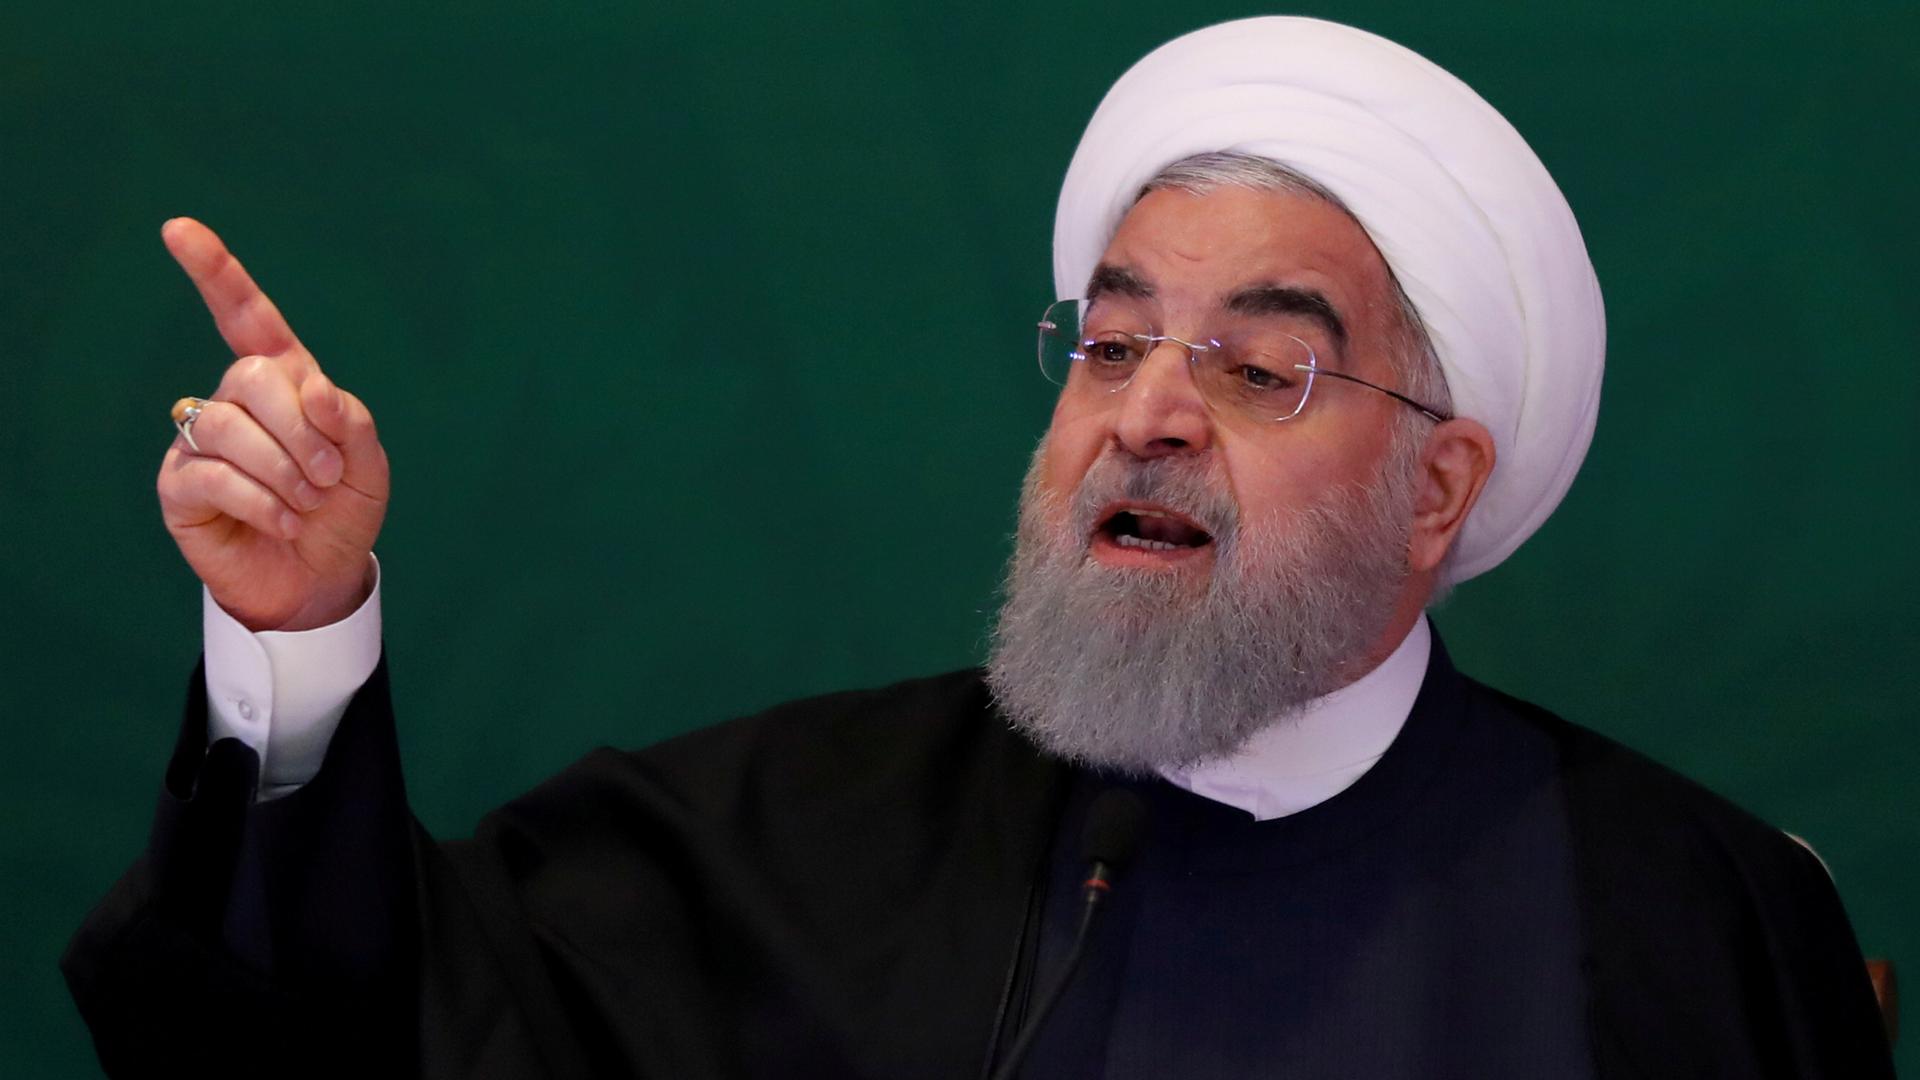 Iranian President Hassan Rouhani speaks during a meeting with Muslim leaders and scholars in Hyderabad, India.